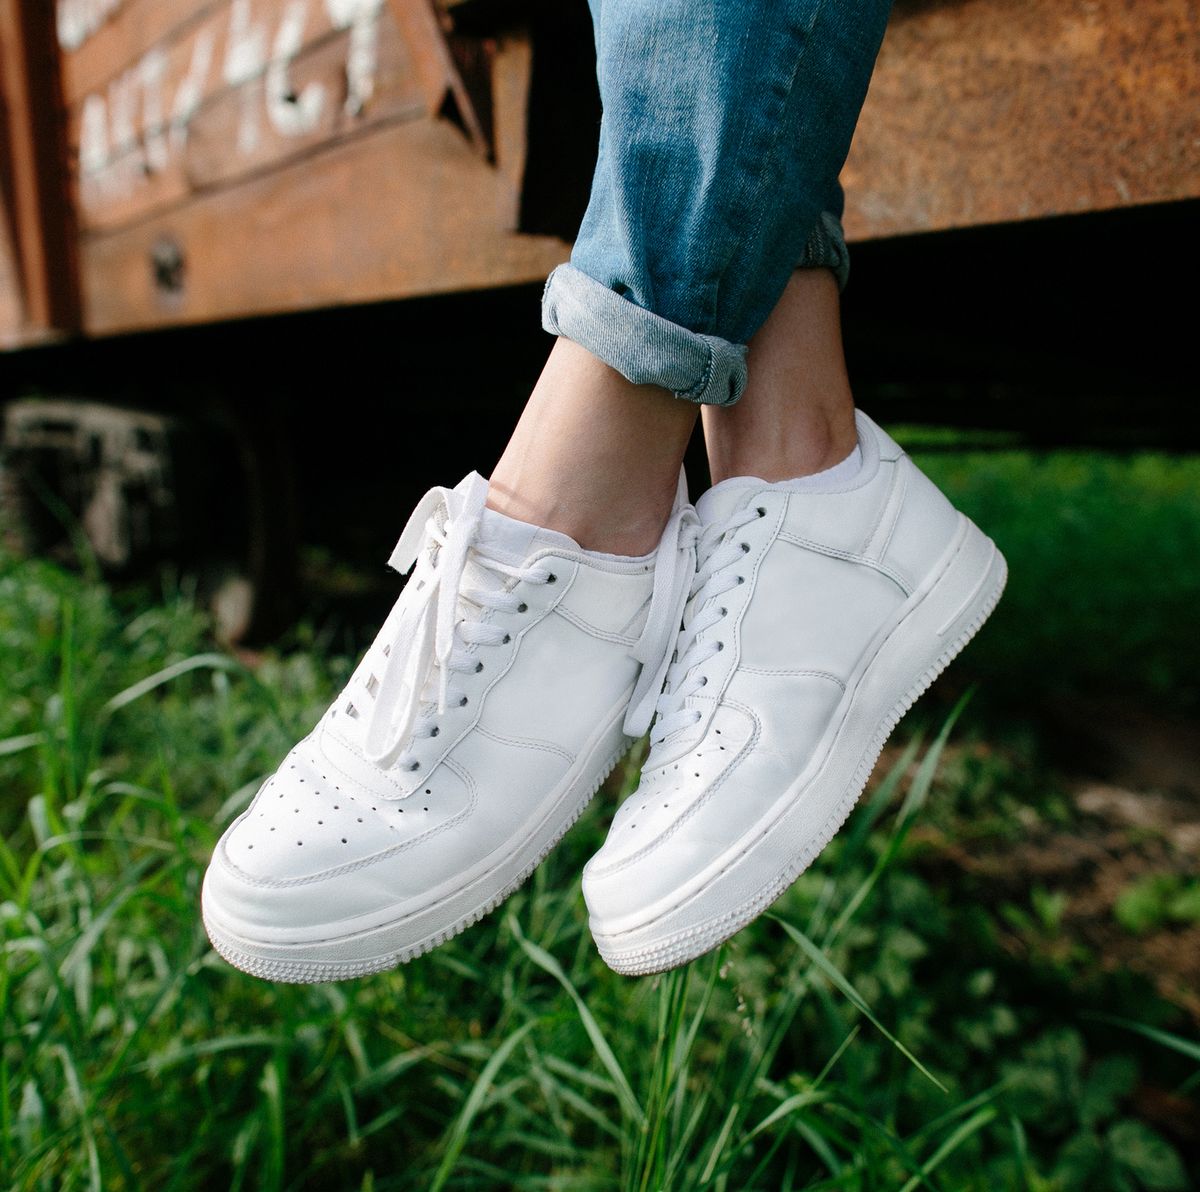 How to Clean White Shoes - Best Way to Clean White Converse or Canvas Vans  with Baking Soda